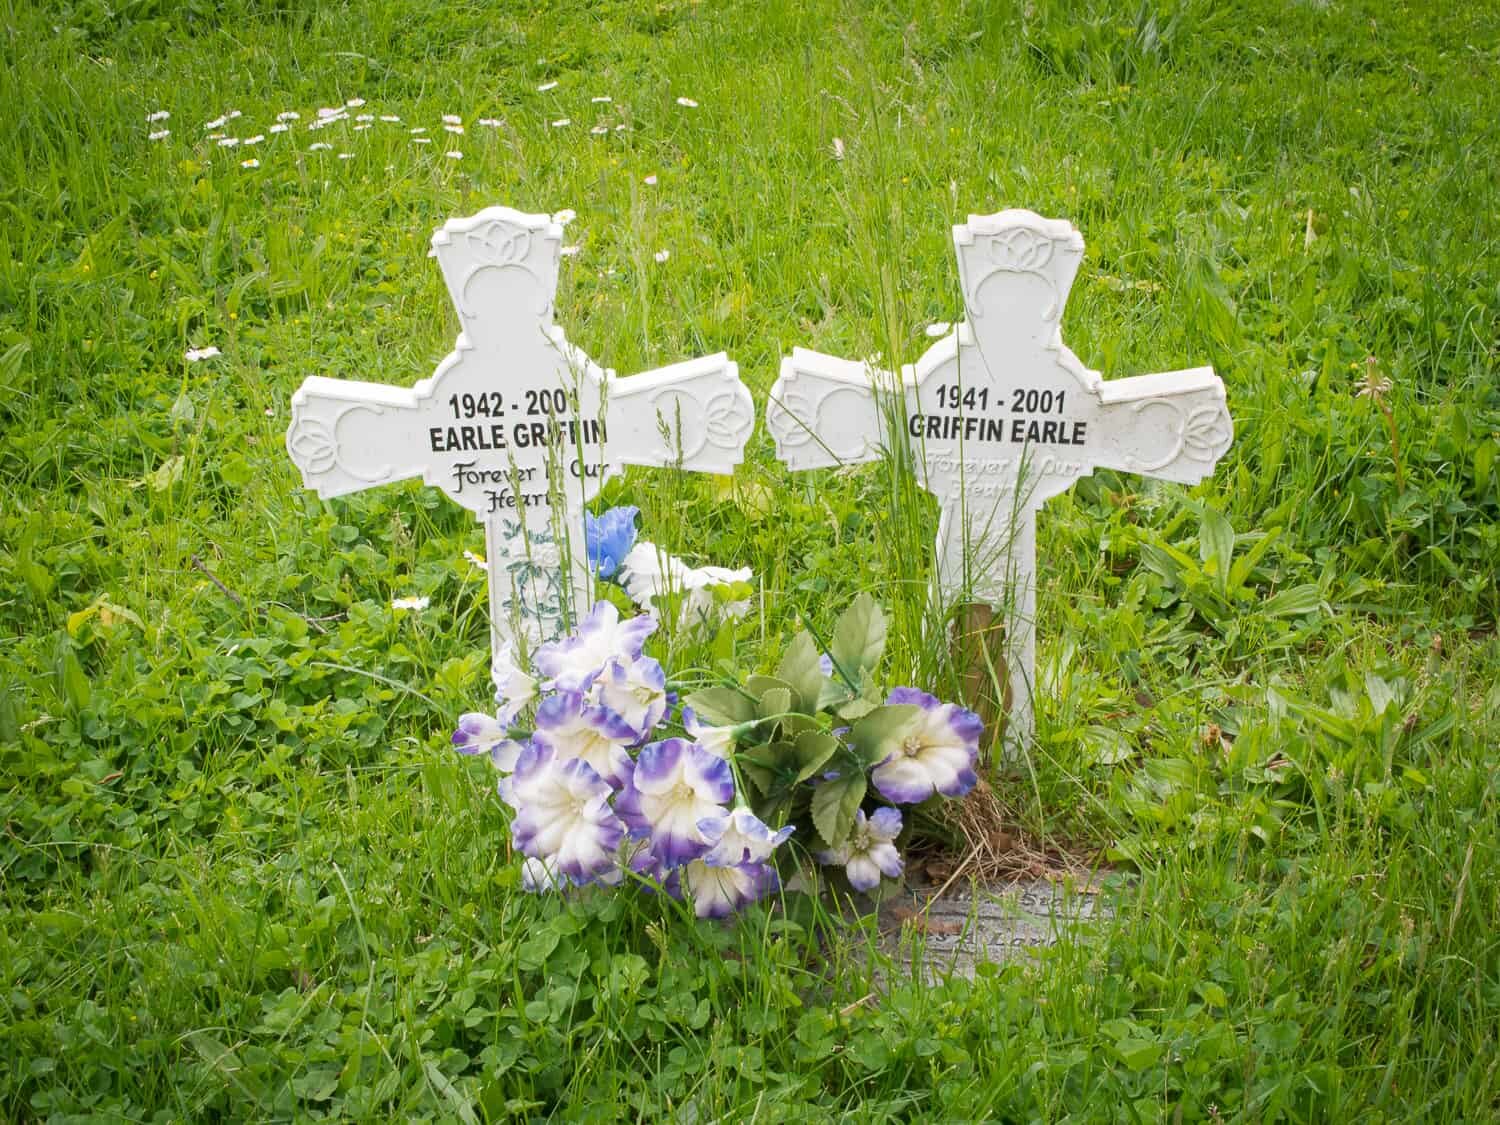  Griffin Earle died 2001 and Earle Griffin died 2001